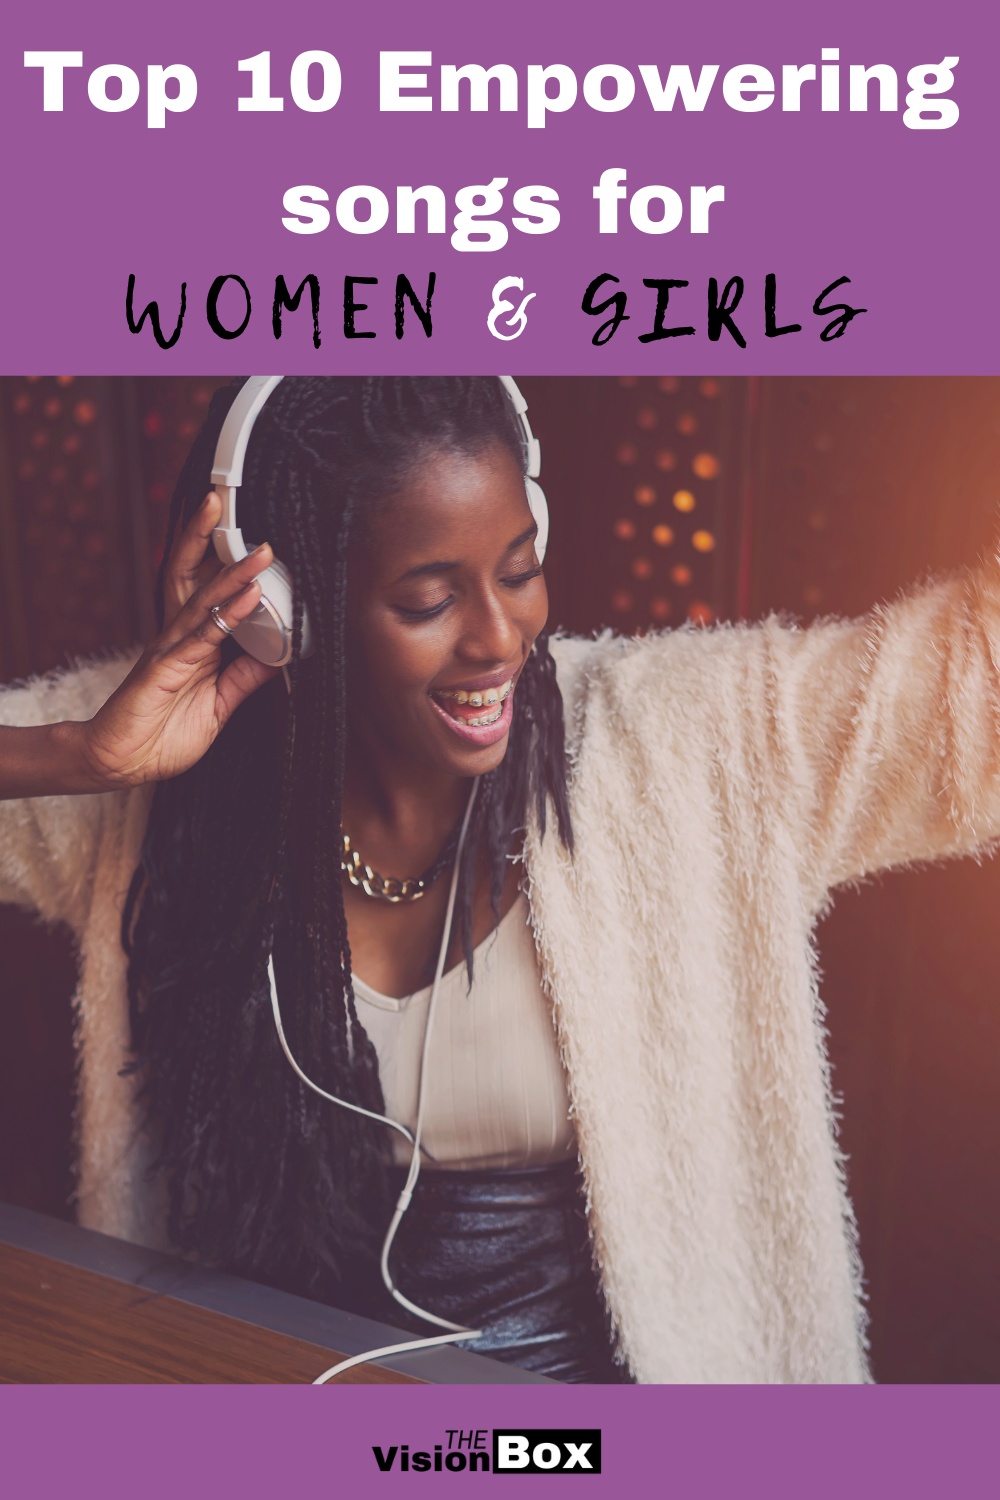 Top 10 Empowering Songs for WOMEN & GIRLS